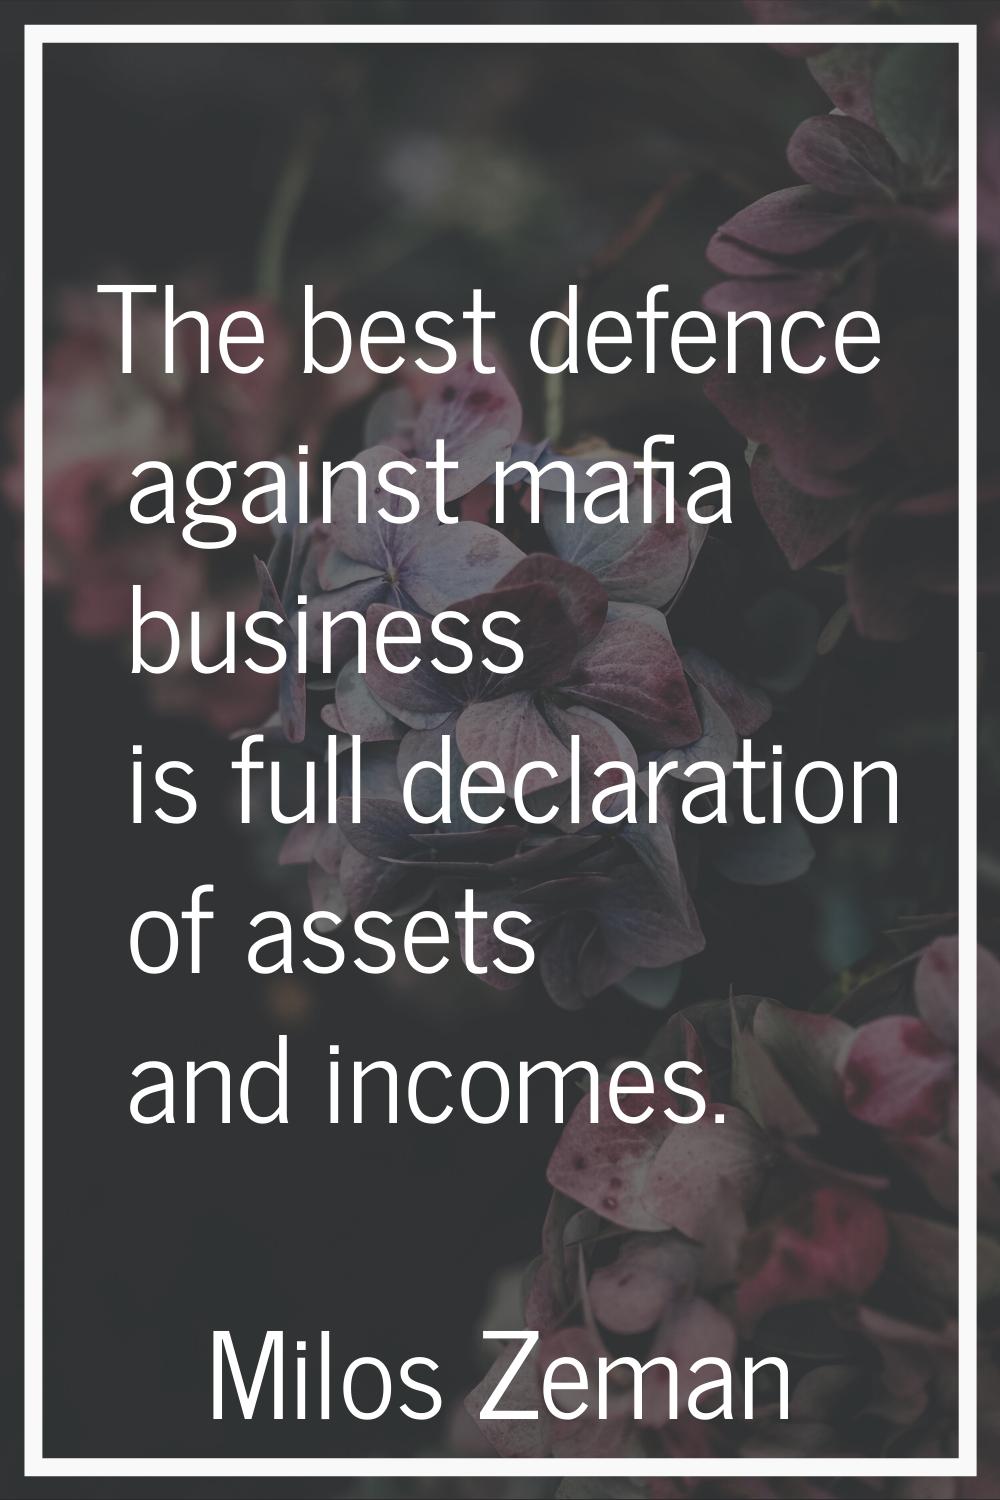 The best defence against mafia business is full declaration of assets and incomes.